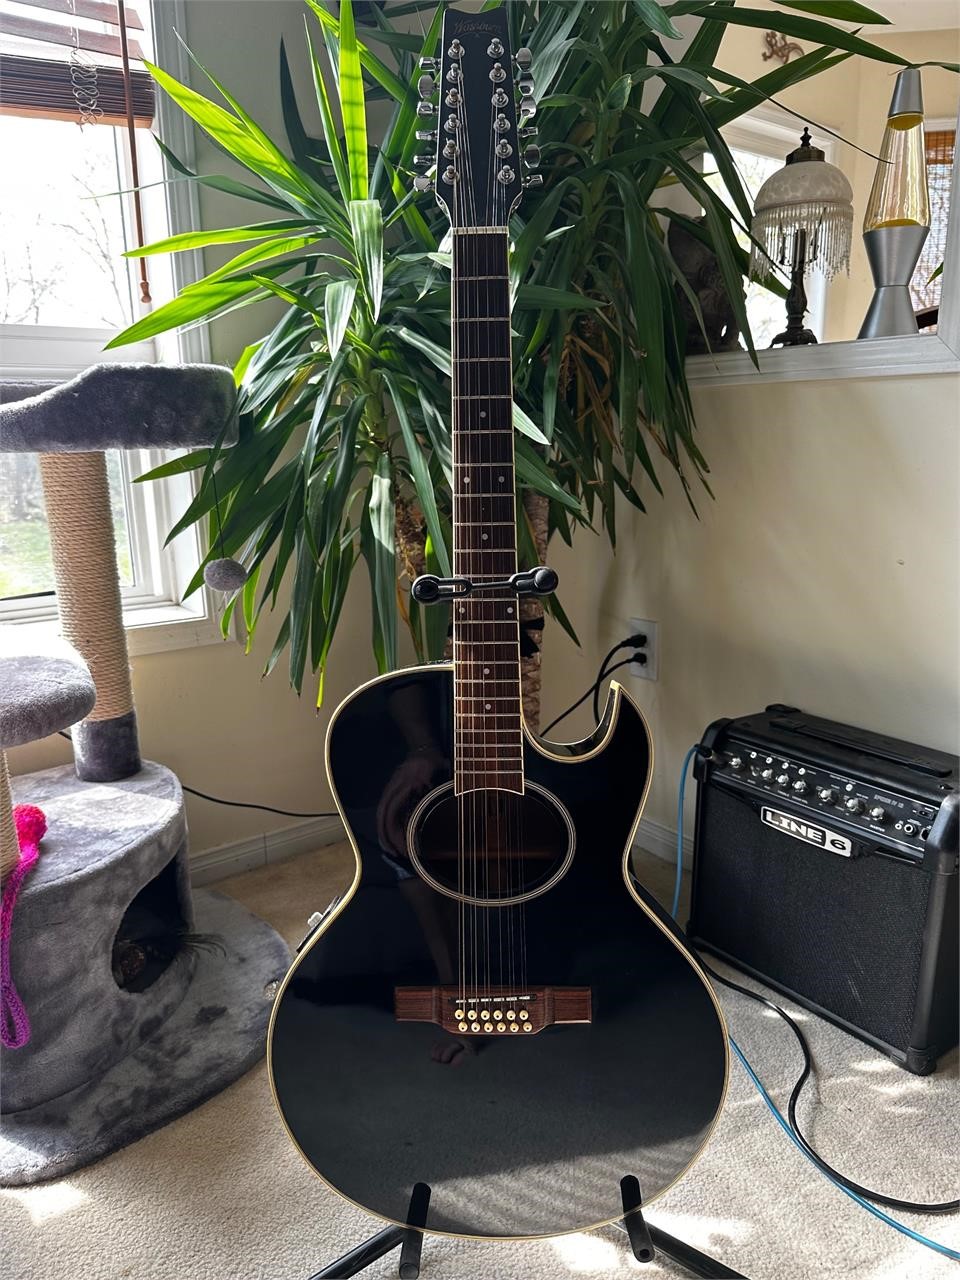 12 String Washburn Electric Acoustic Guitar